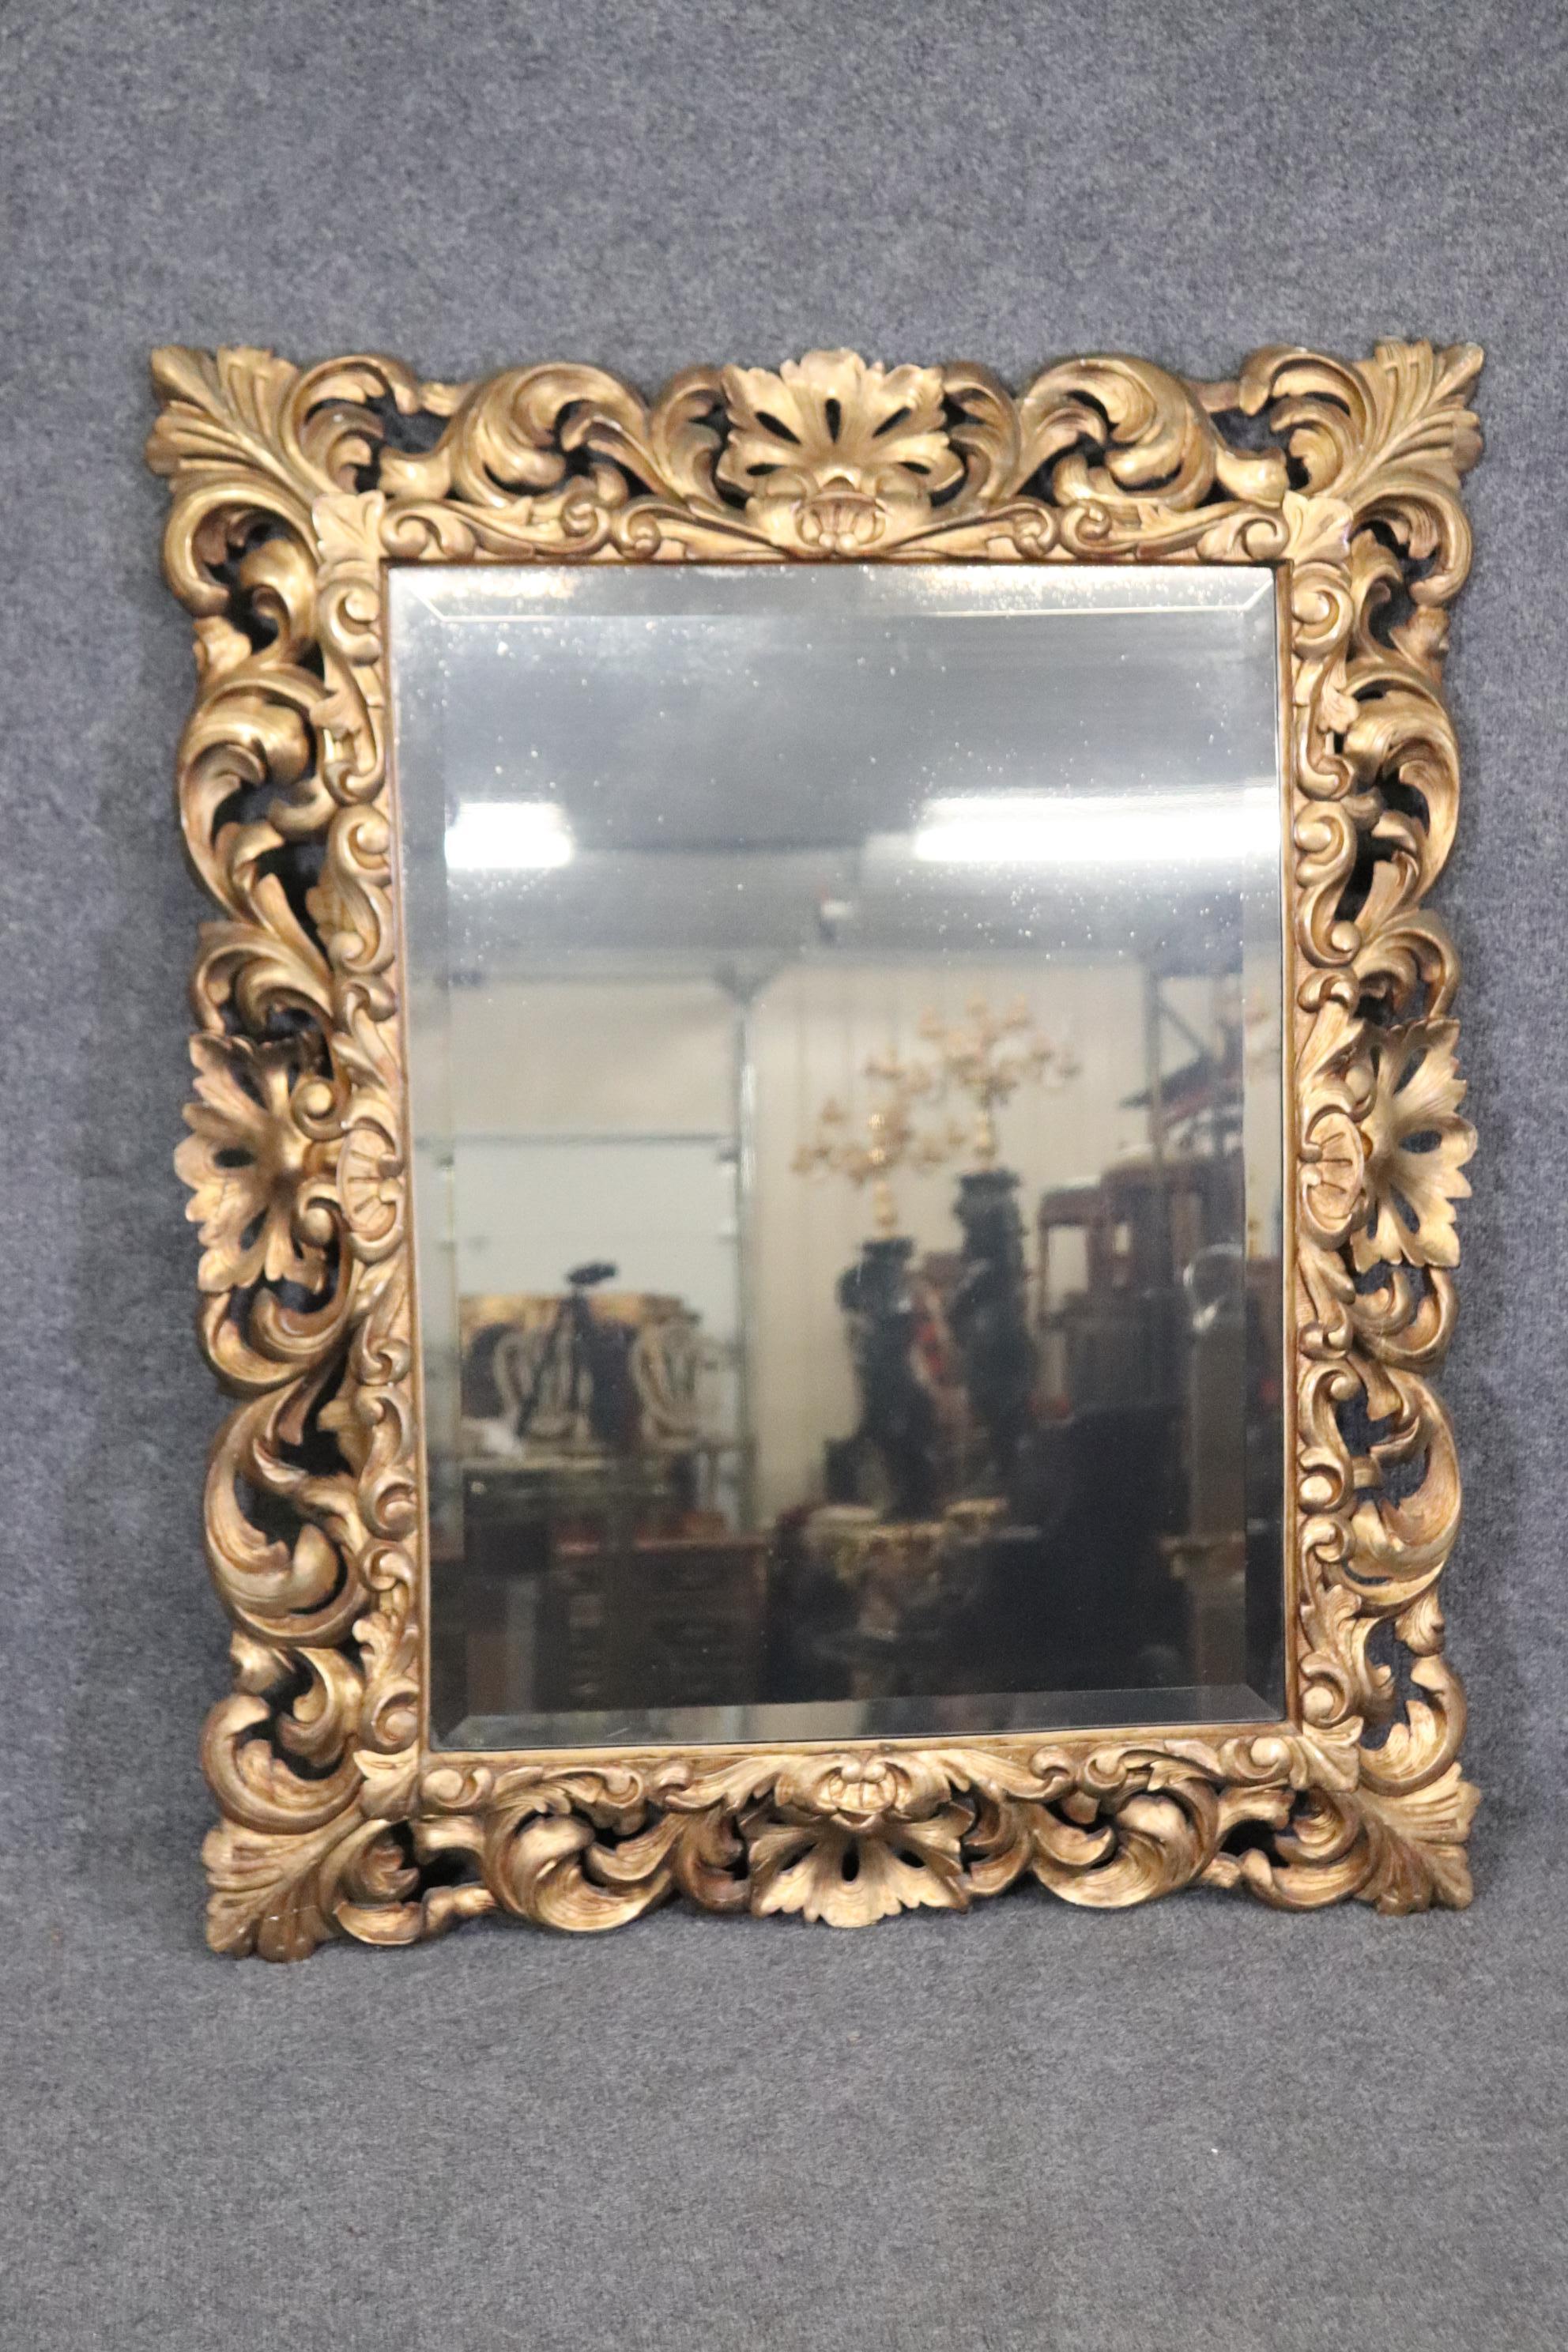 This is a beautiful intricately carved mirror with a gorgeous gilded frame and beveled glass mirror. Measures 45.75 tall x 38 wide x 3.75 deep and dates to the 1940s era. Has old minor repairs to the back, and minor signs of wear and age from use.